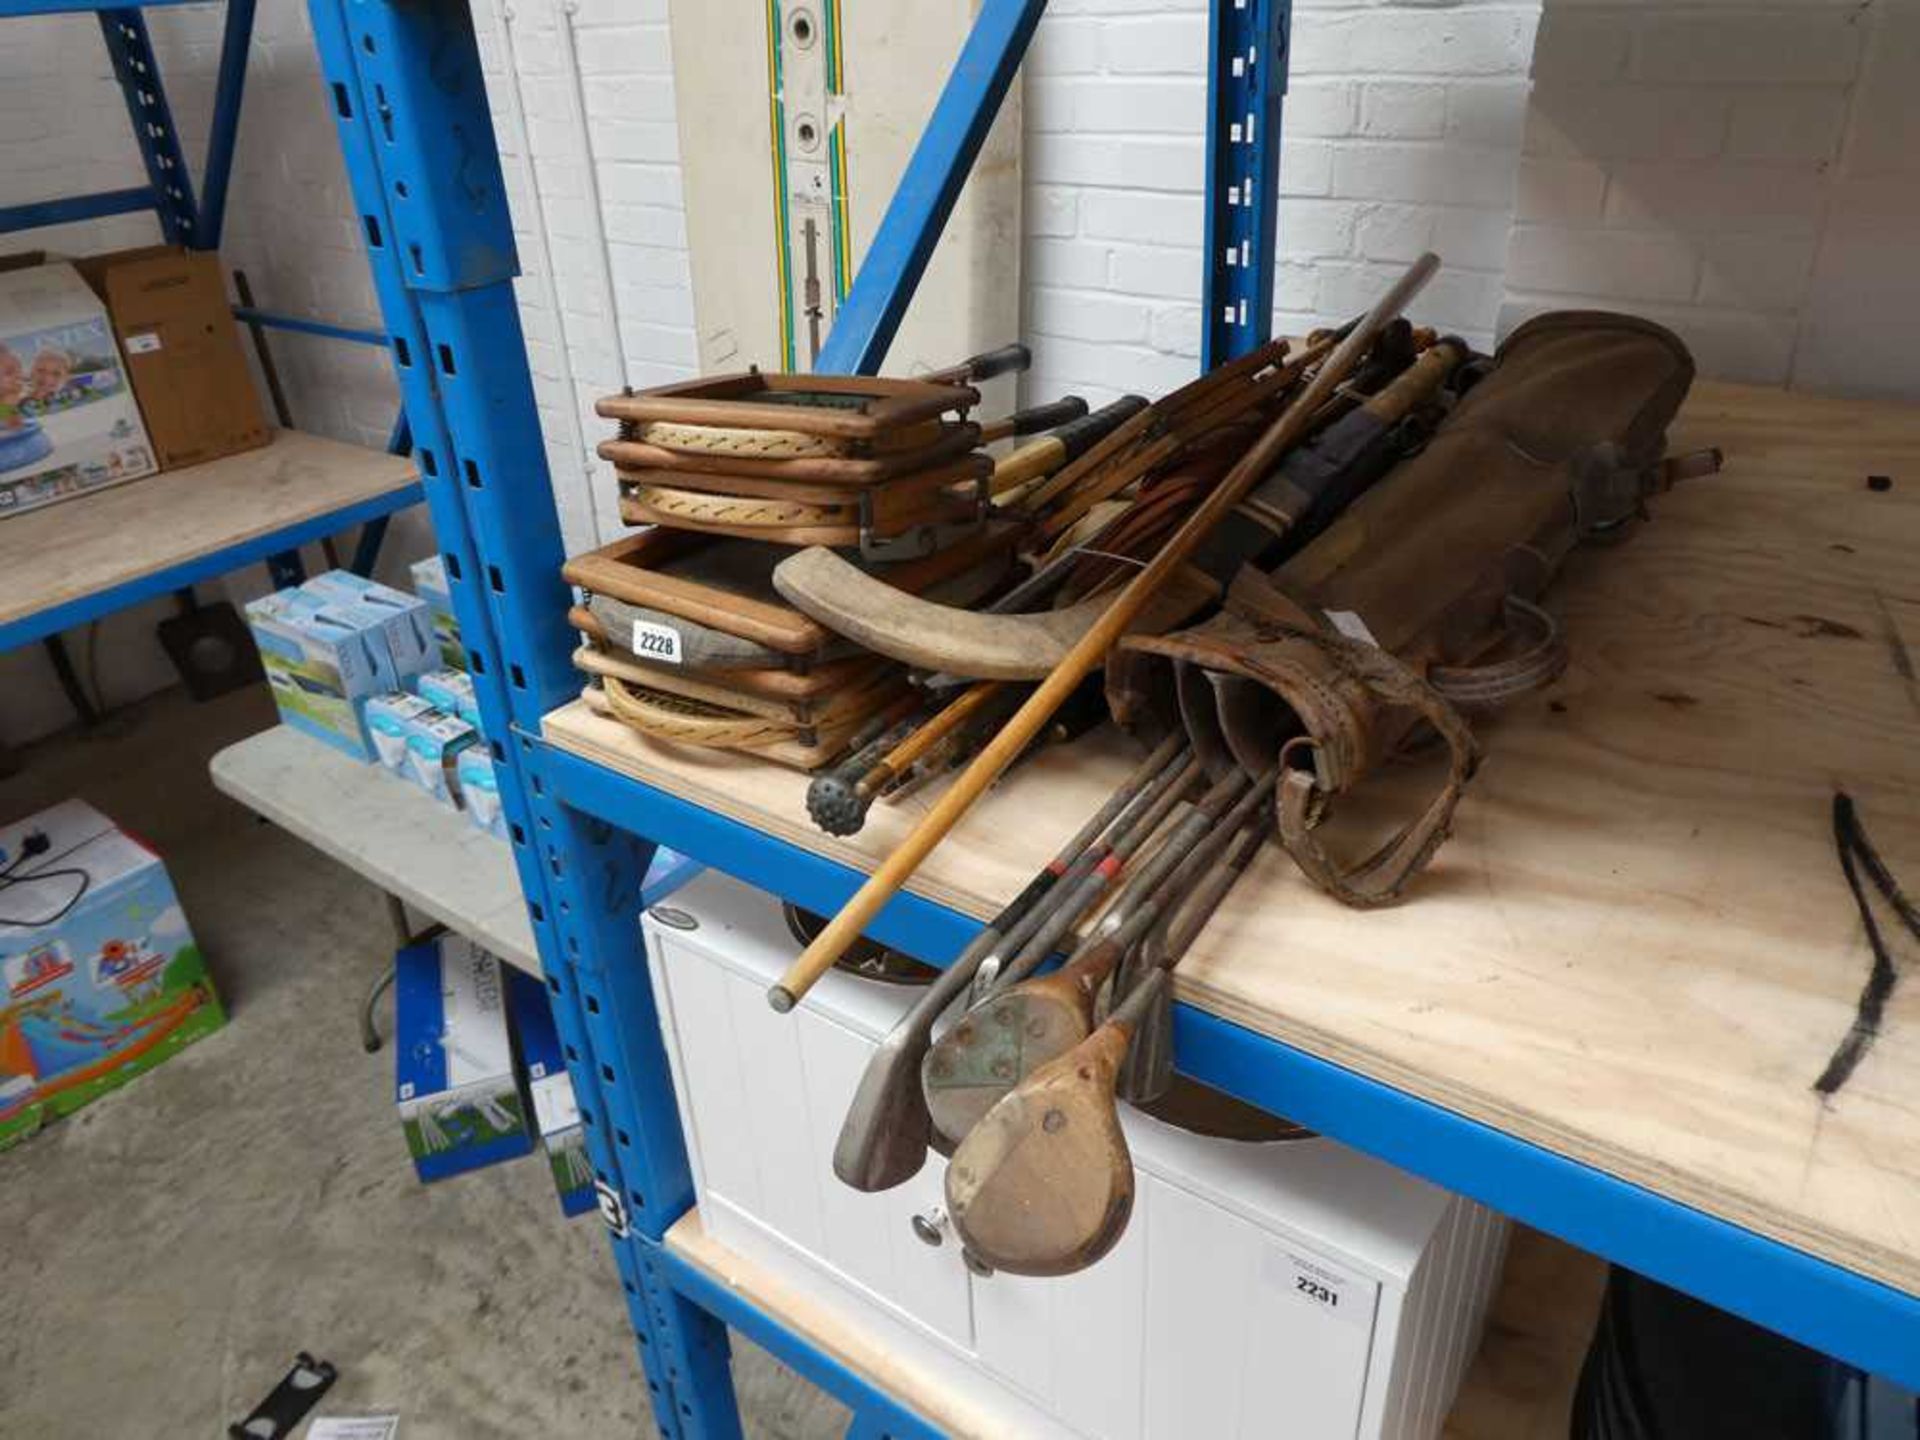 Large quantity of vintage outdoor tennis and badminton rackets, vintage golf clubs and walking